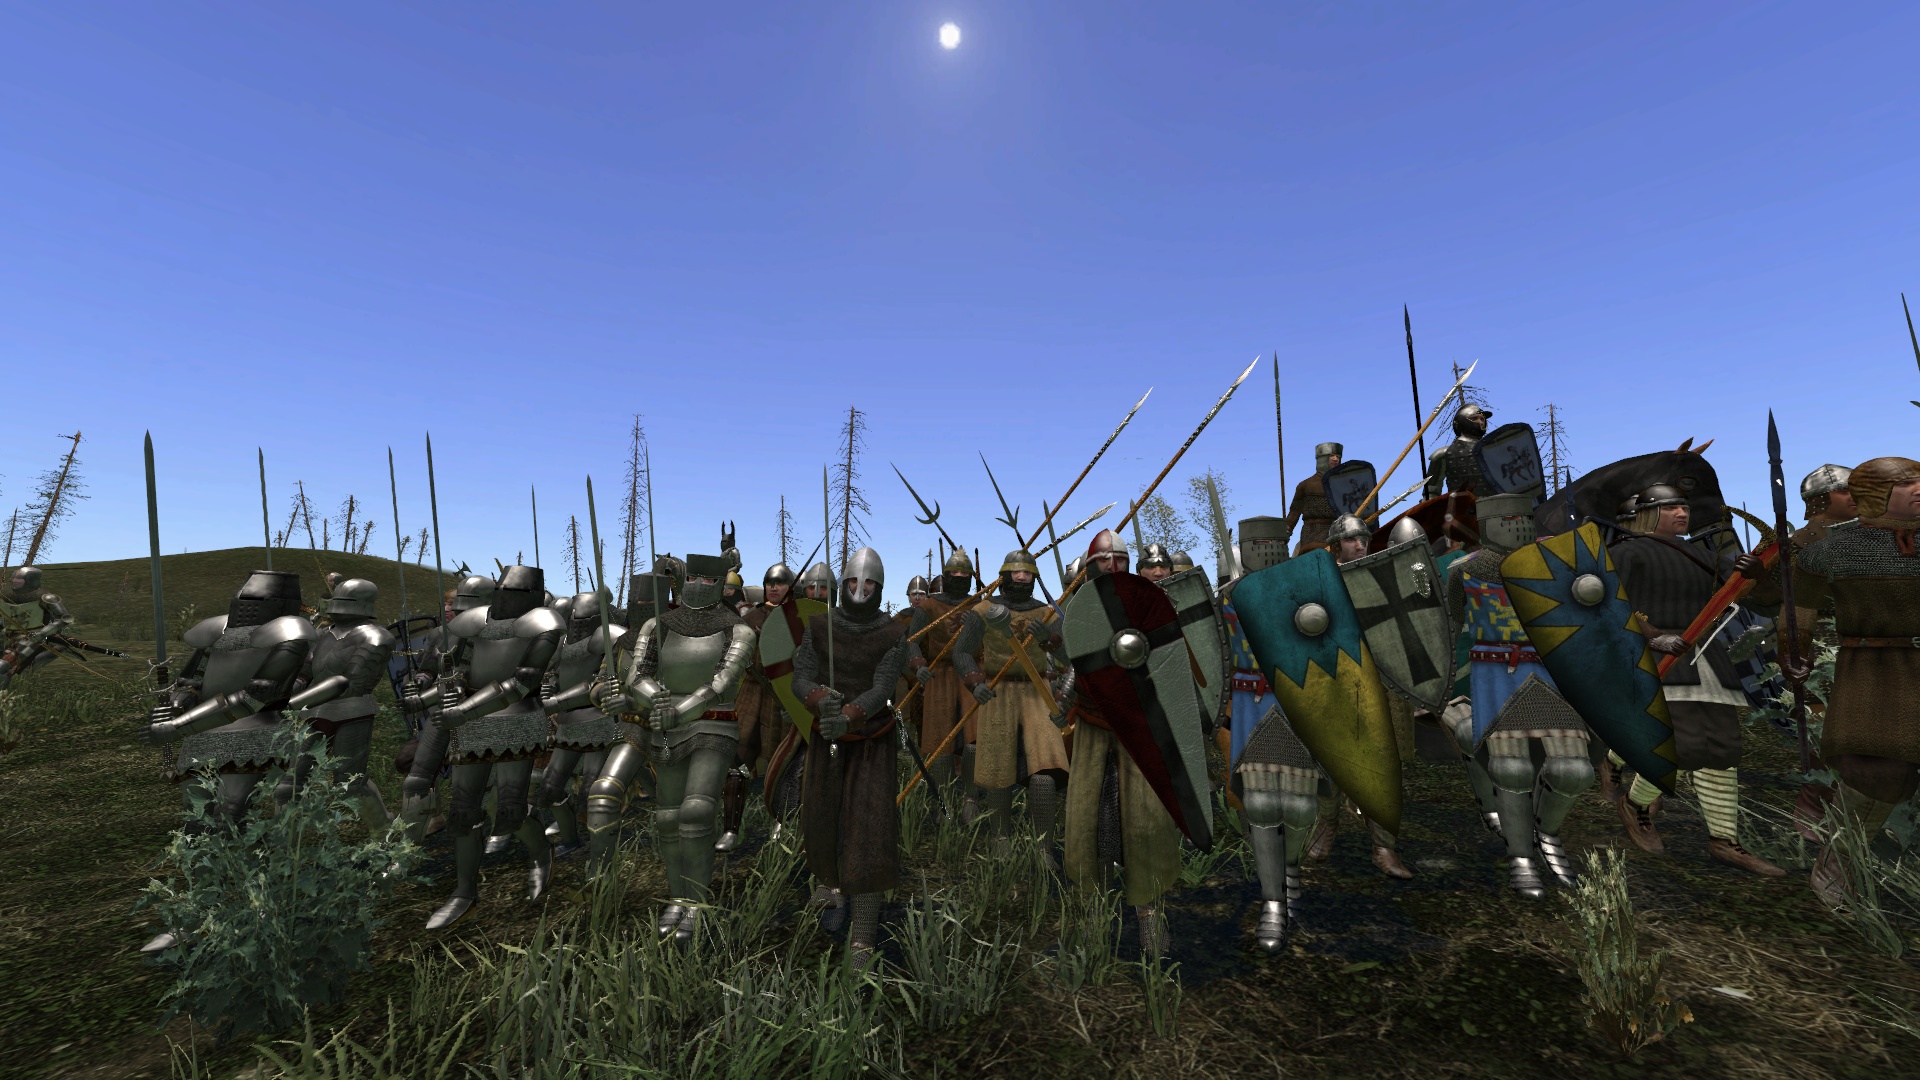 Mount and blade warband русская версия. Mount and Blade сражение. Mount & Blade: Warband. Маунт энд блейд бой. Mount and Blade Warband битва.